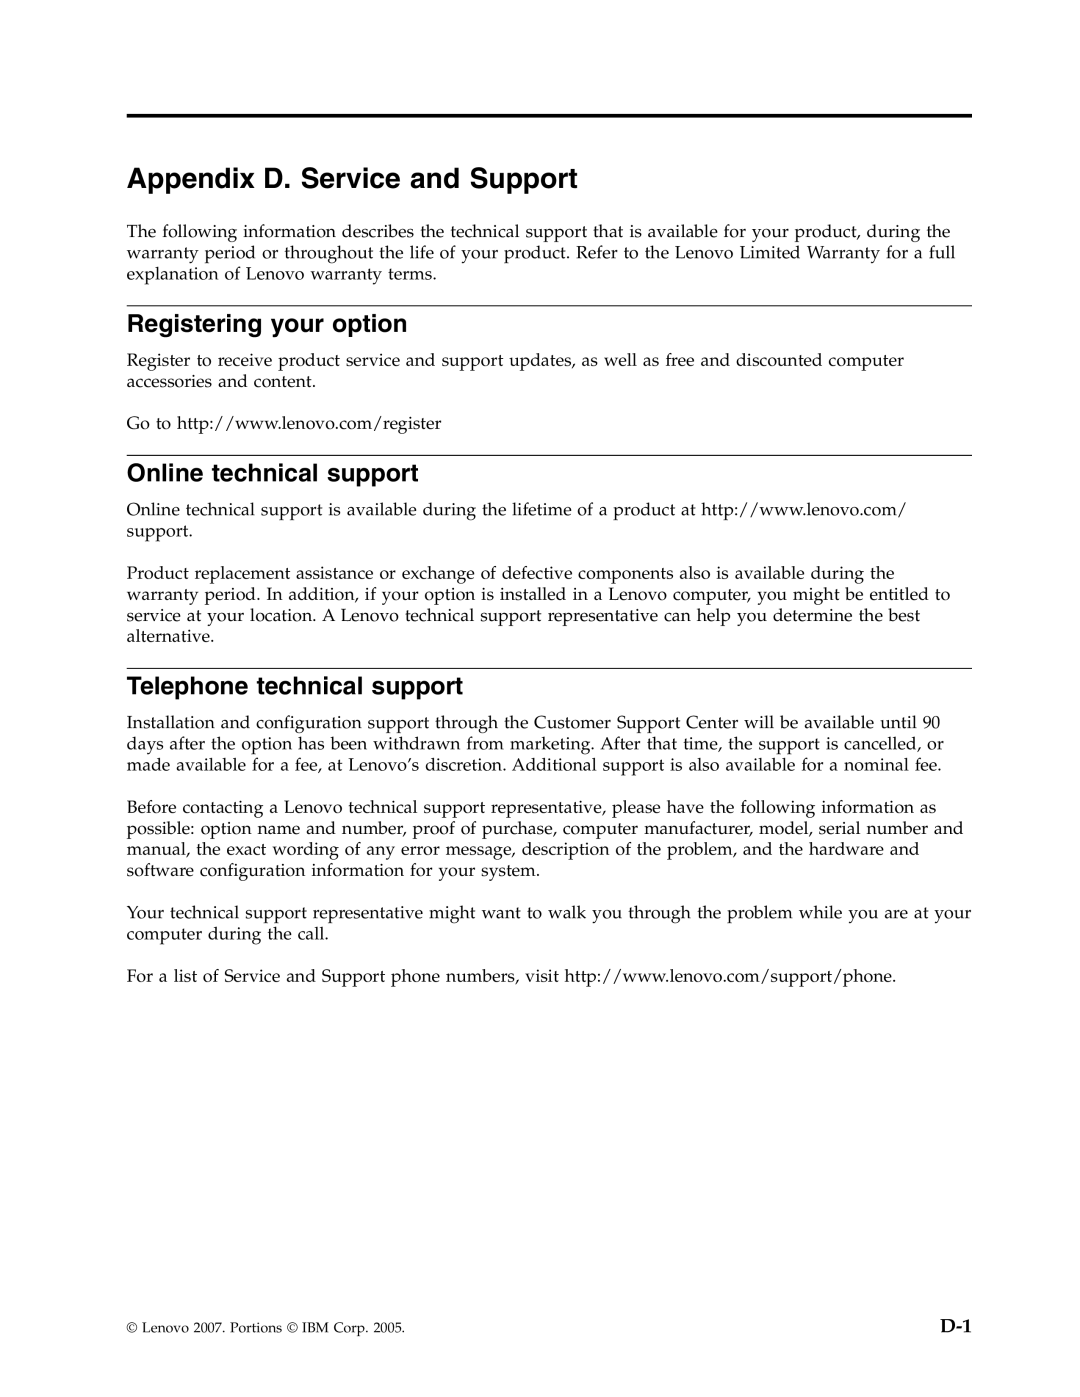 Lenovo 43N3201 manual Appendix D. Service and Support, Registering your option, Online technical support 